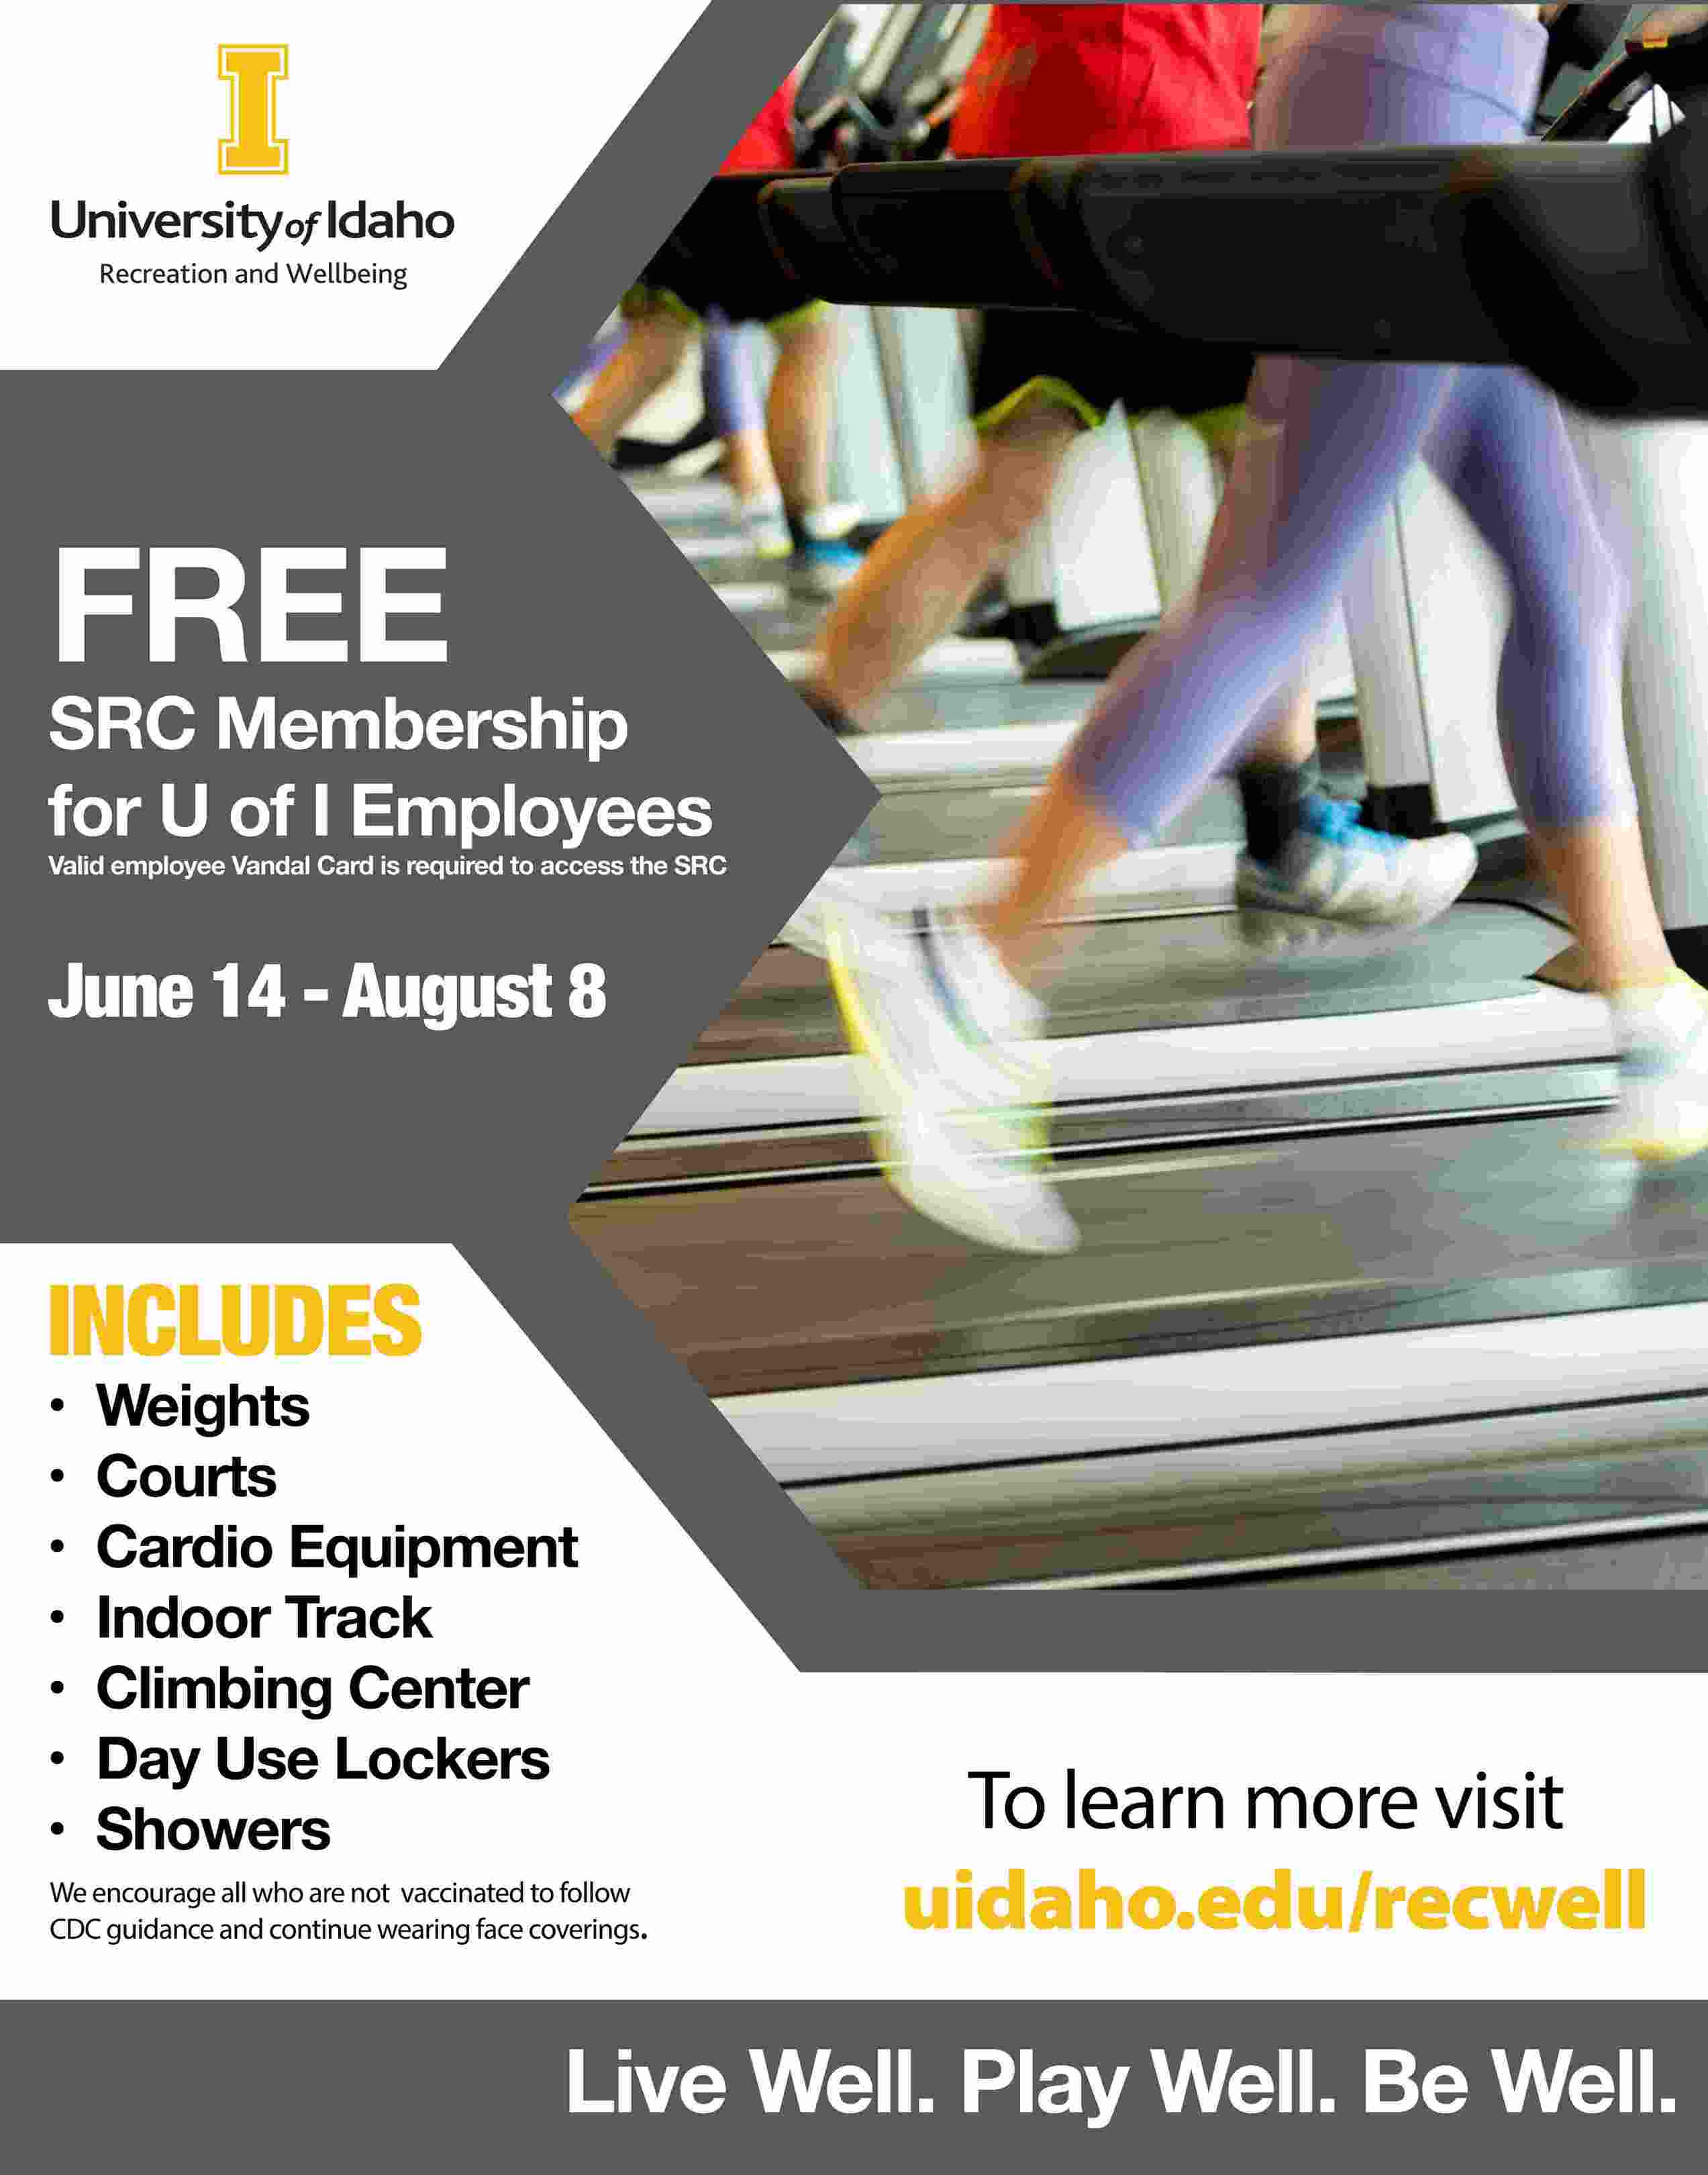 All U of I employees can enjoy free access to the Student Recreation Center June 14 - Aug. 8, 2021.